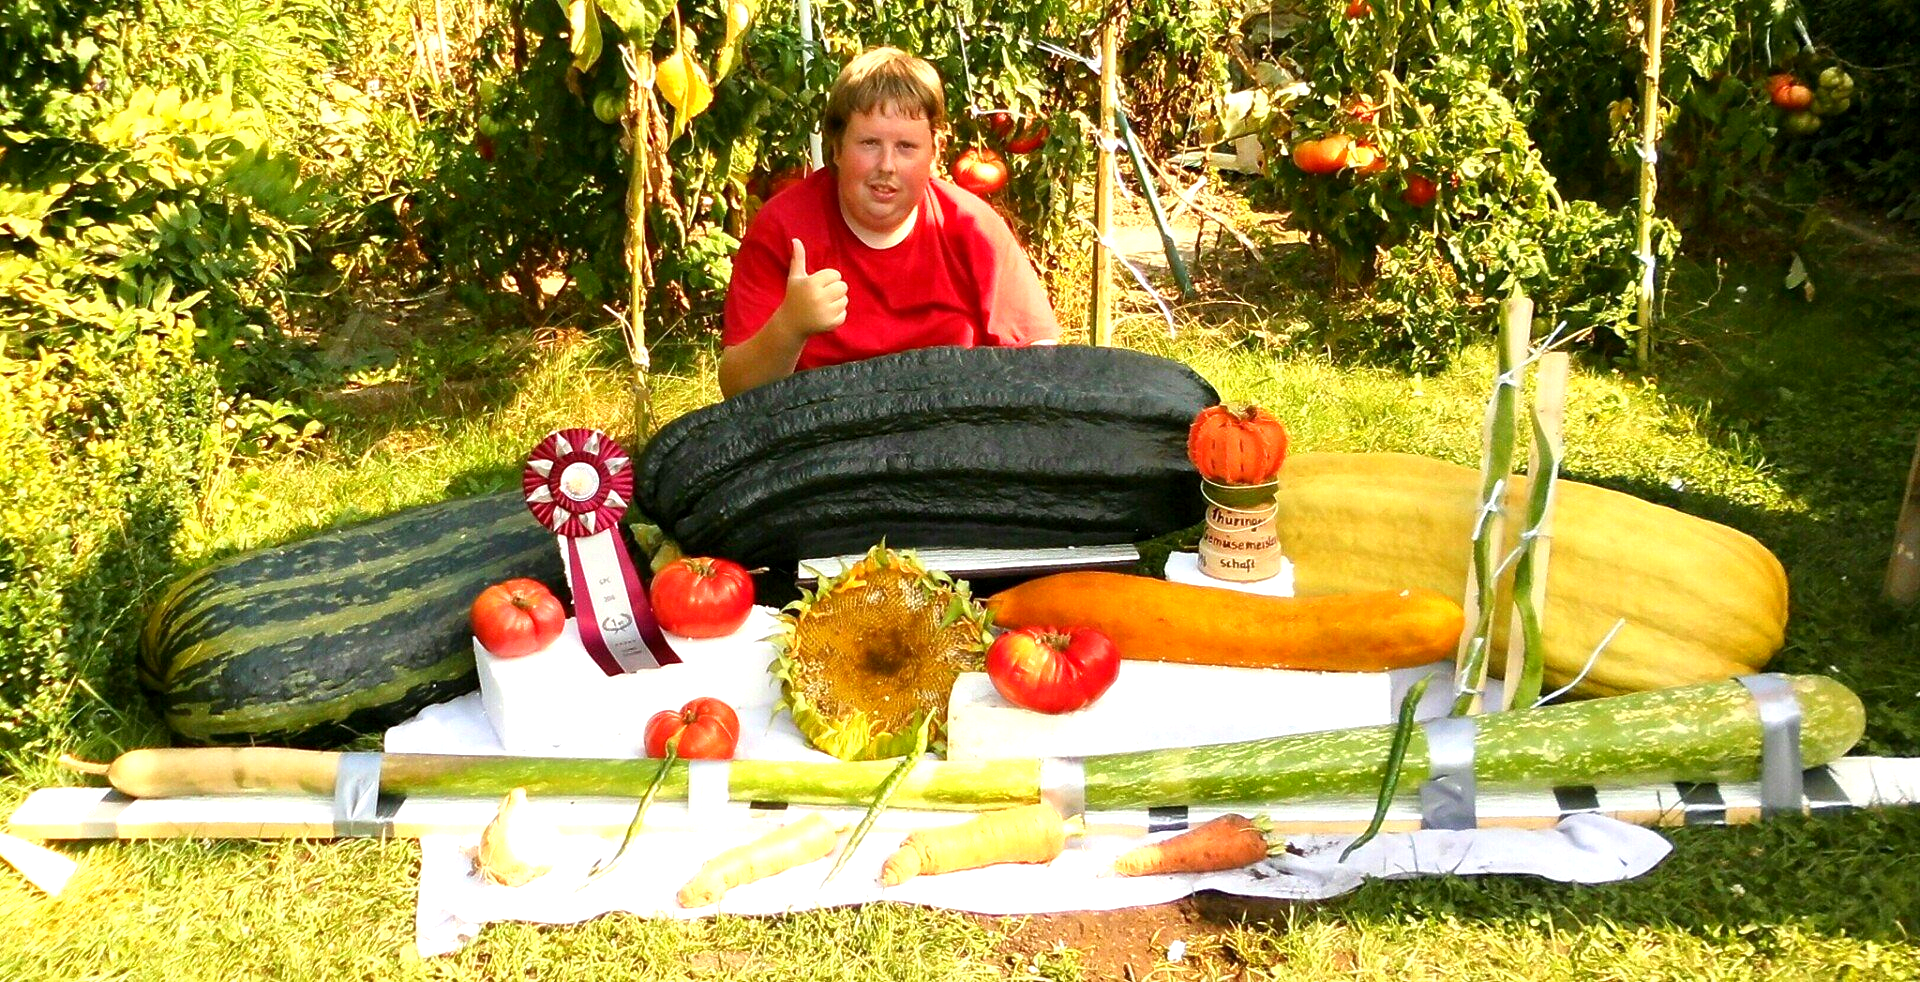 Most giant vegetable varieties cultivated in one garden: world record set by Patrick Teichmann